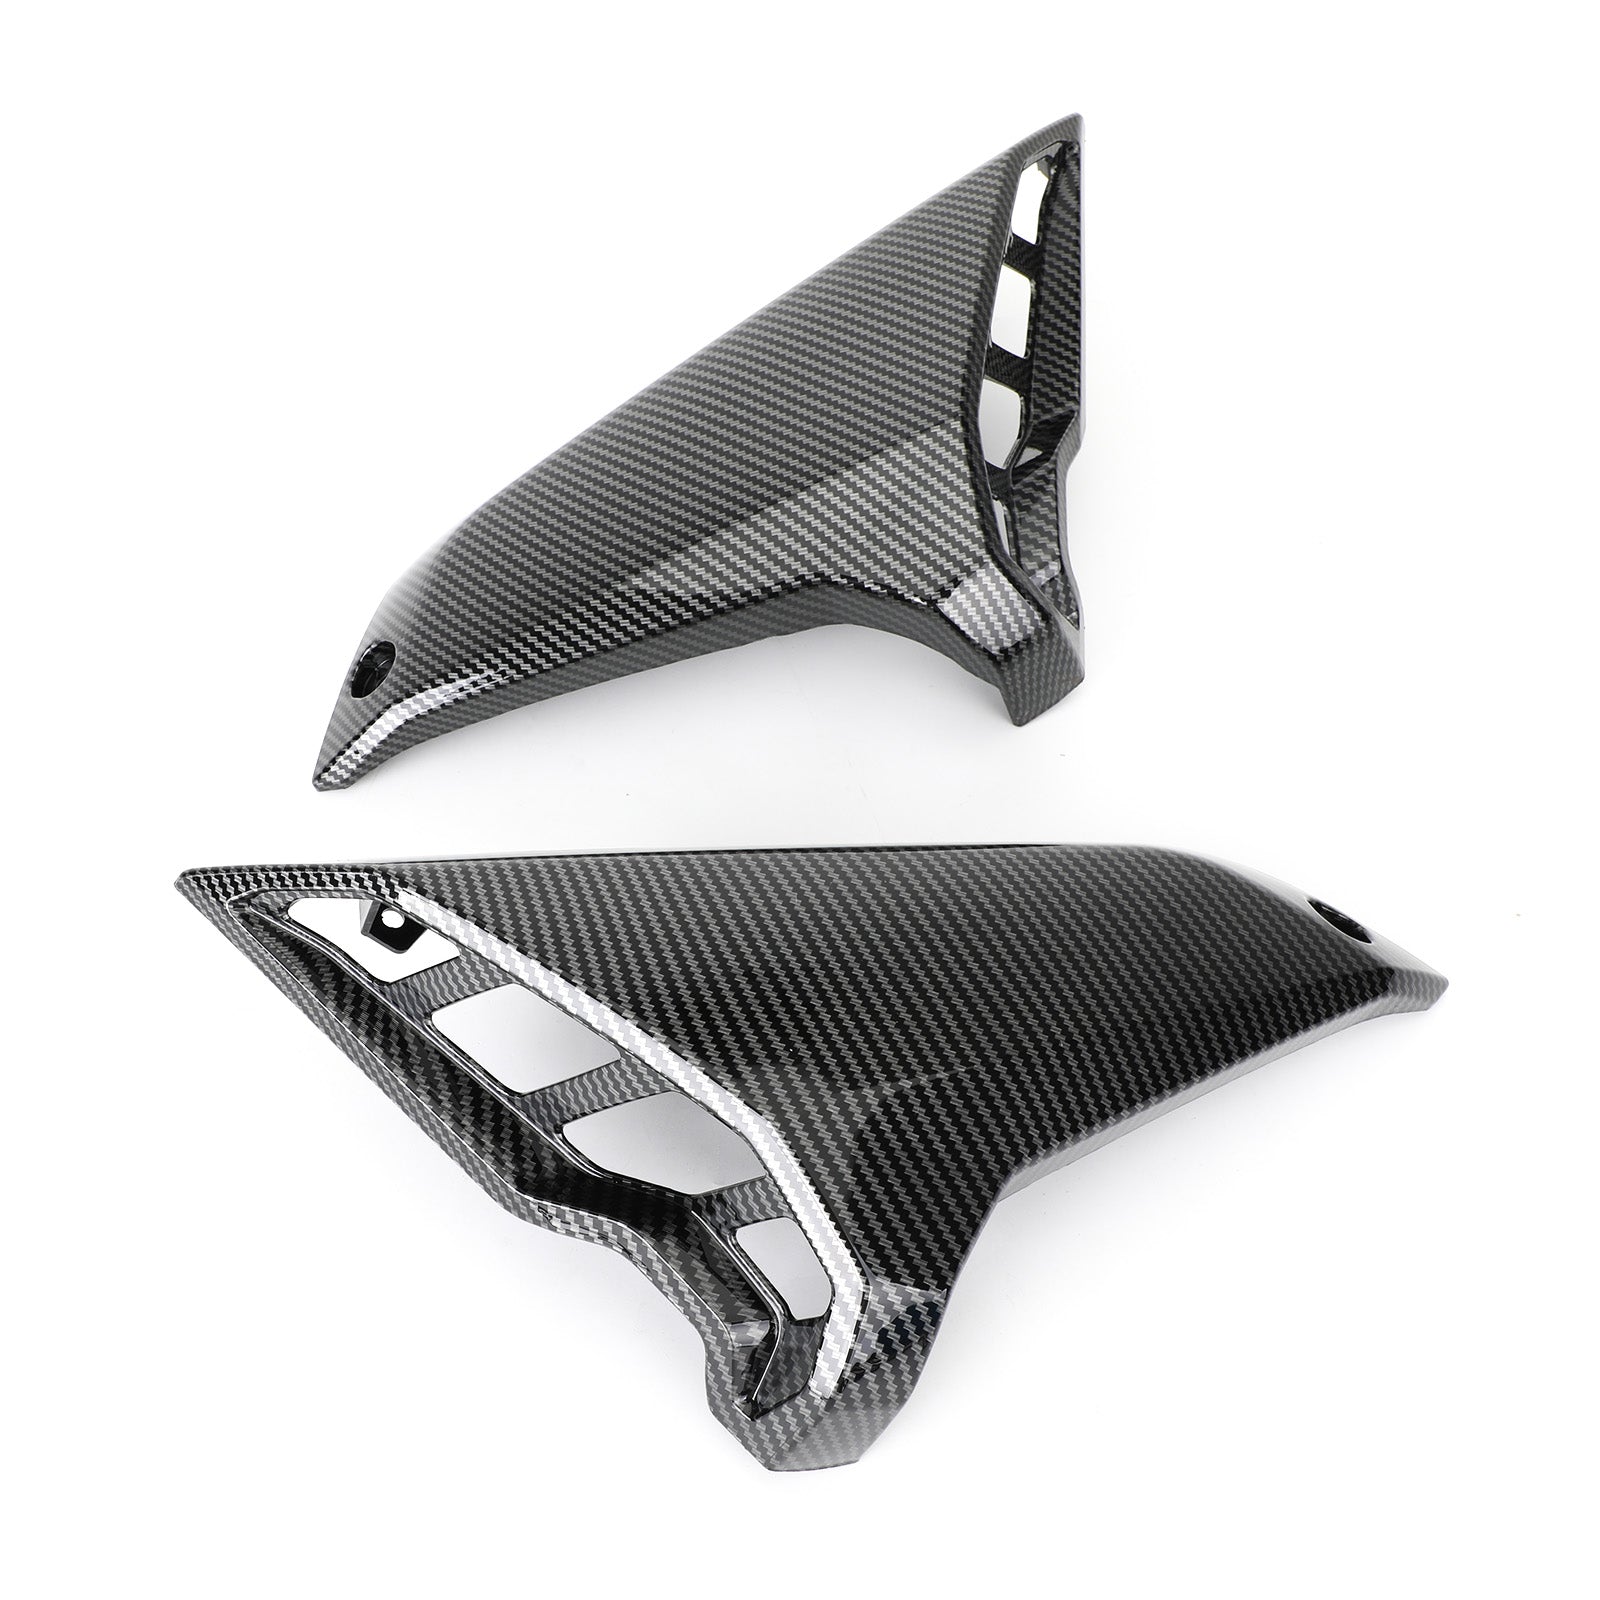 Air Intake Panel Fairing Covers Fit for Yamaha MT09 MT-09 FZ-09 2017-2020